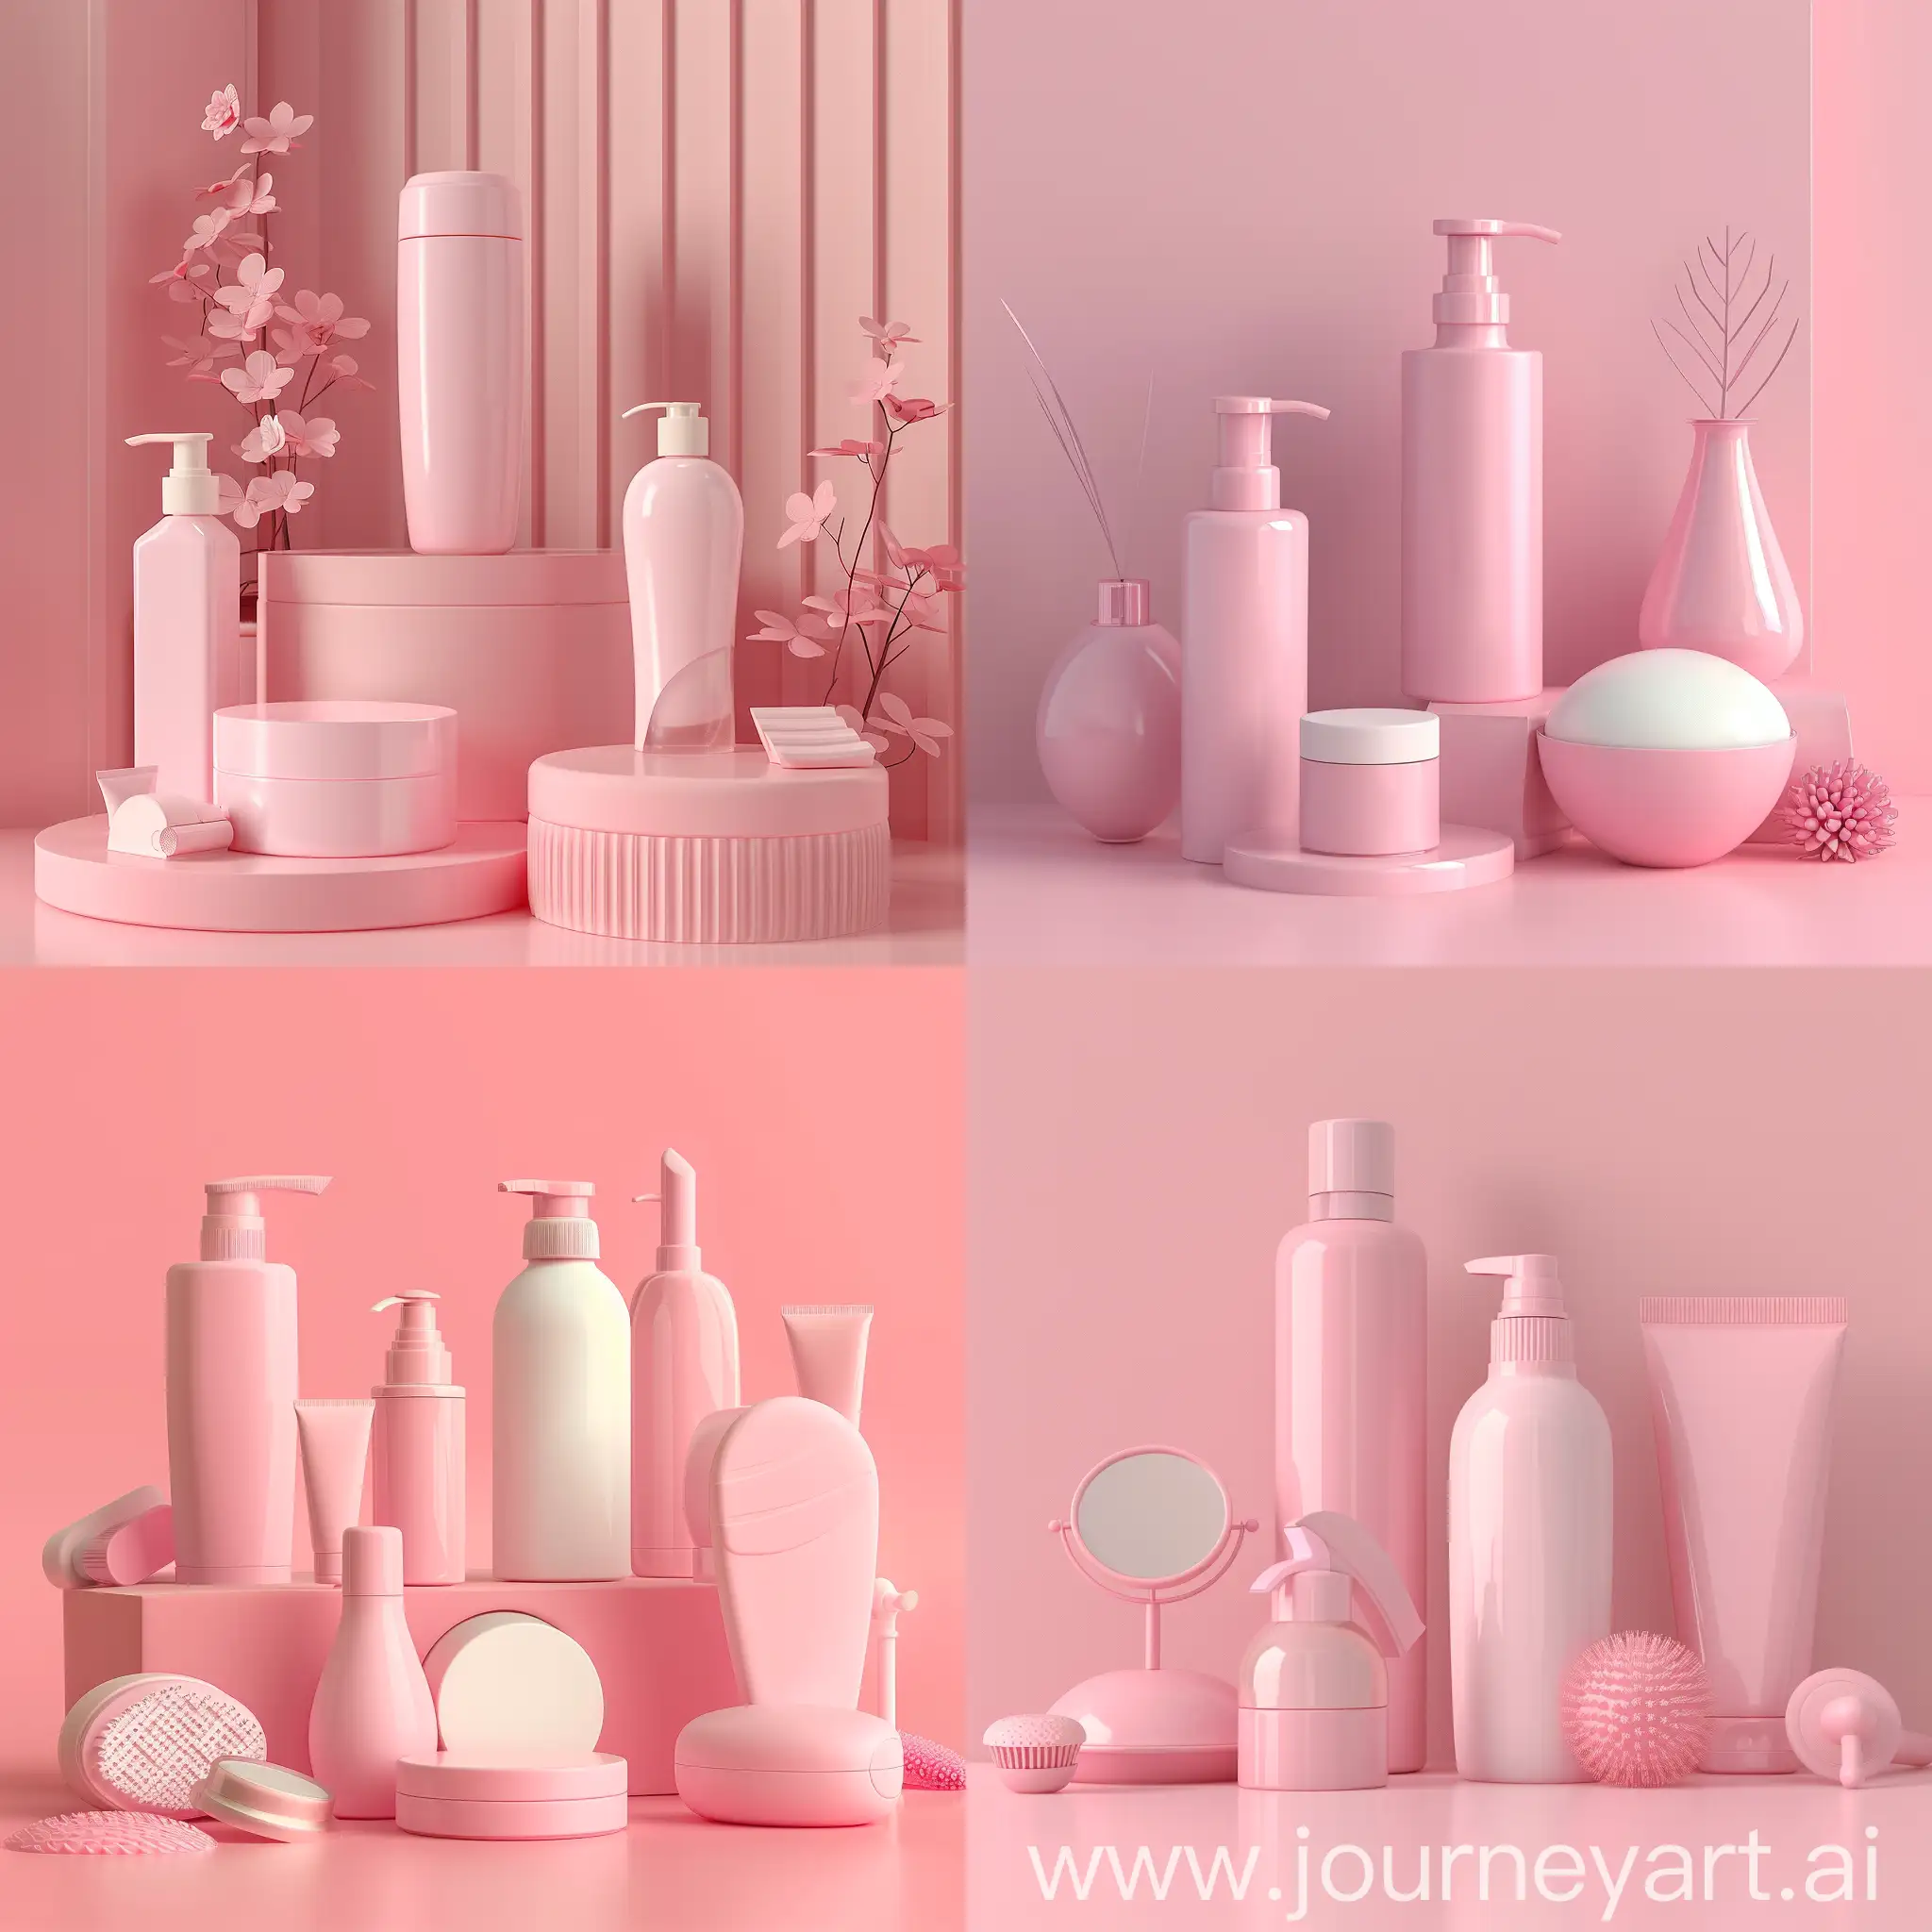 3D-Rendering-of-Personal-Care-Products-in-Fondant-Pink